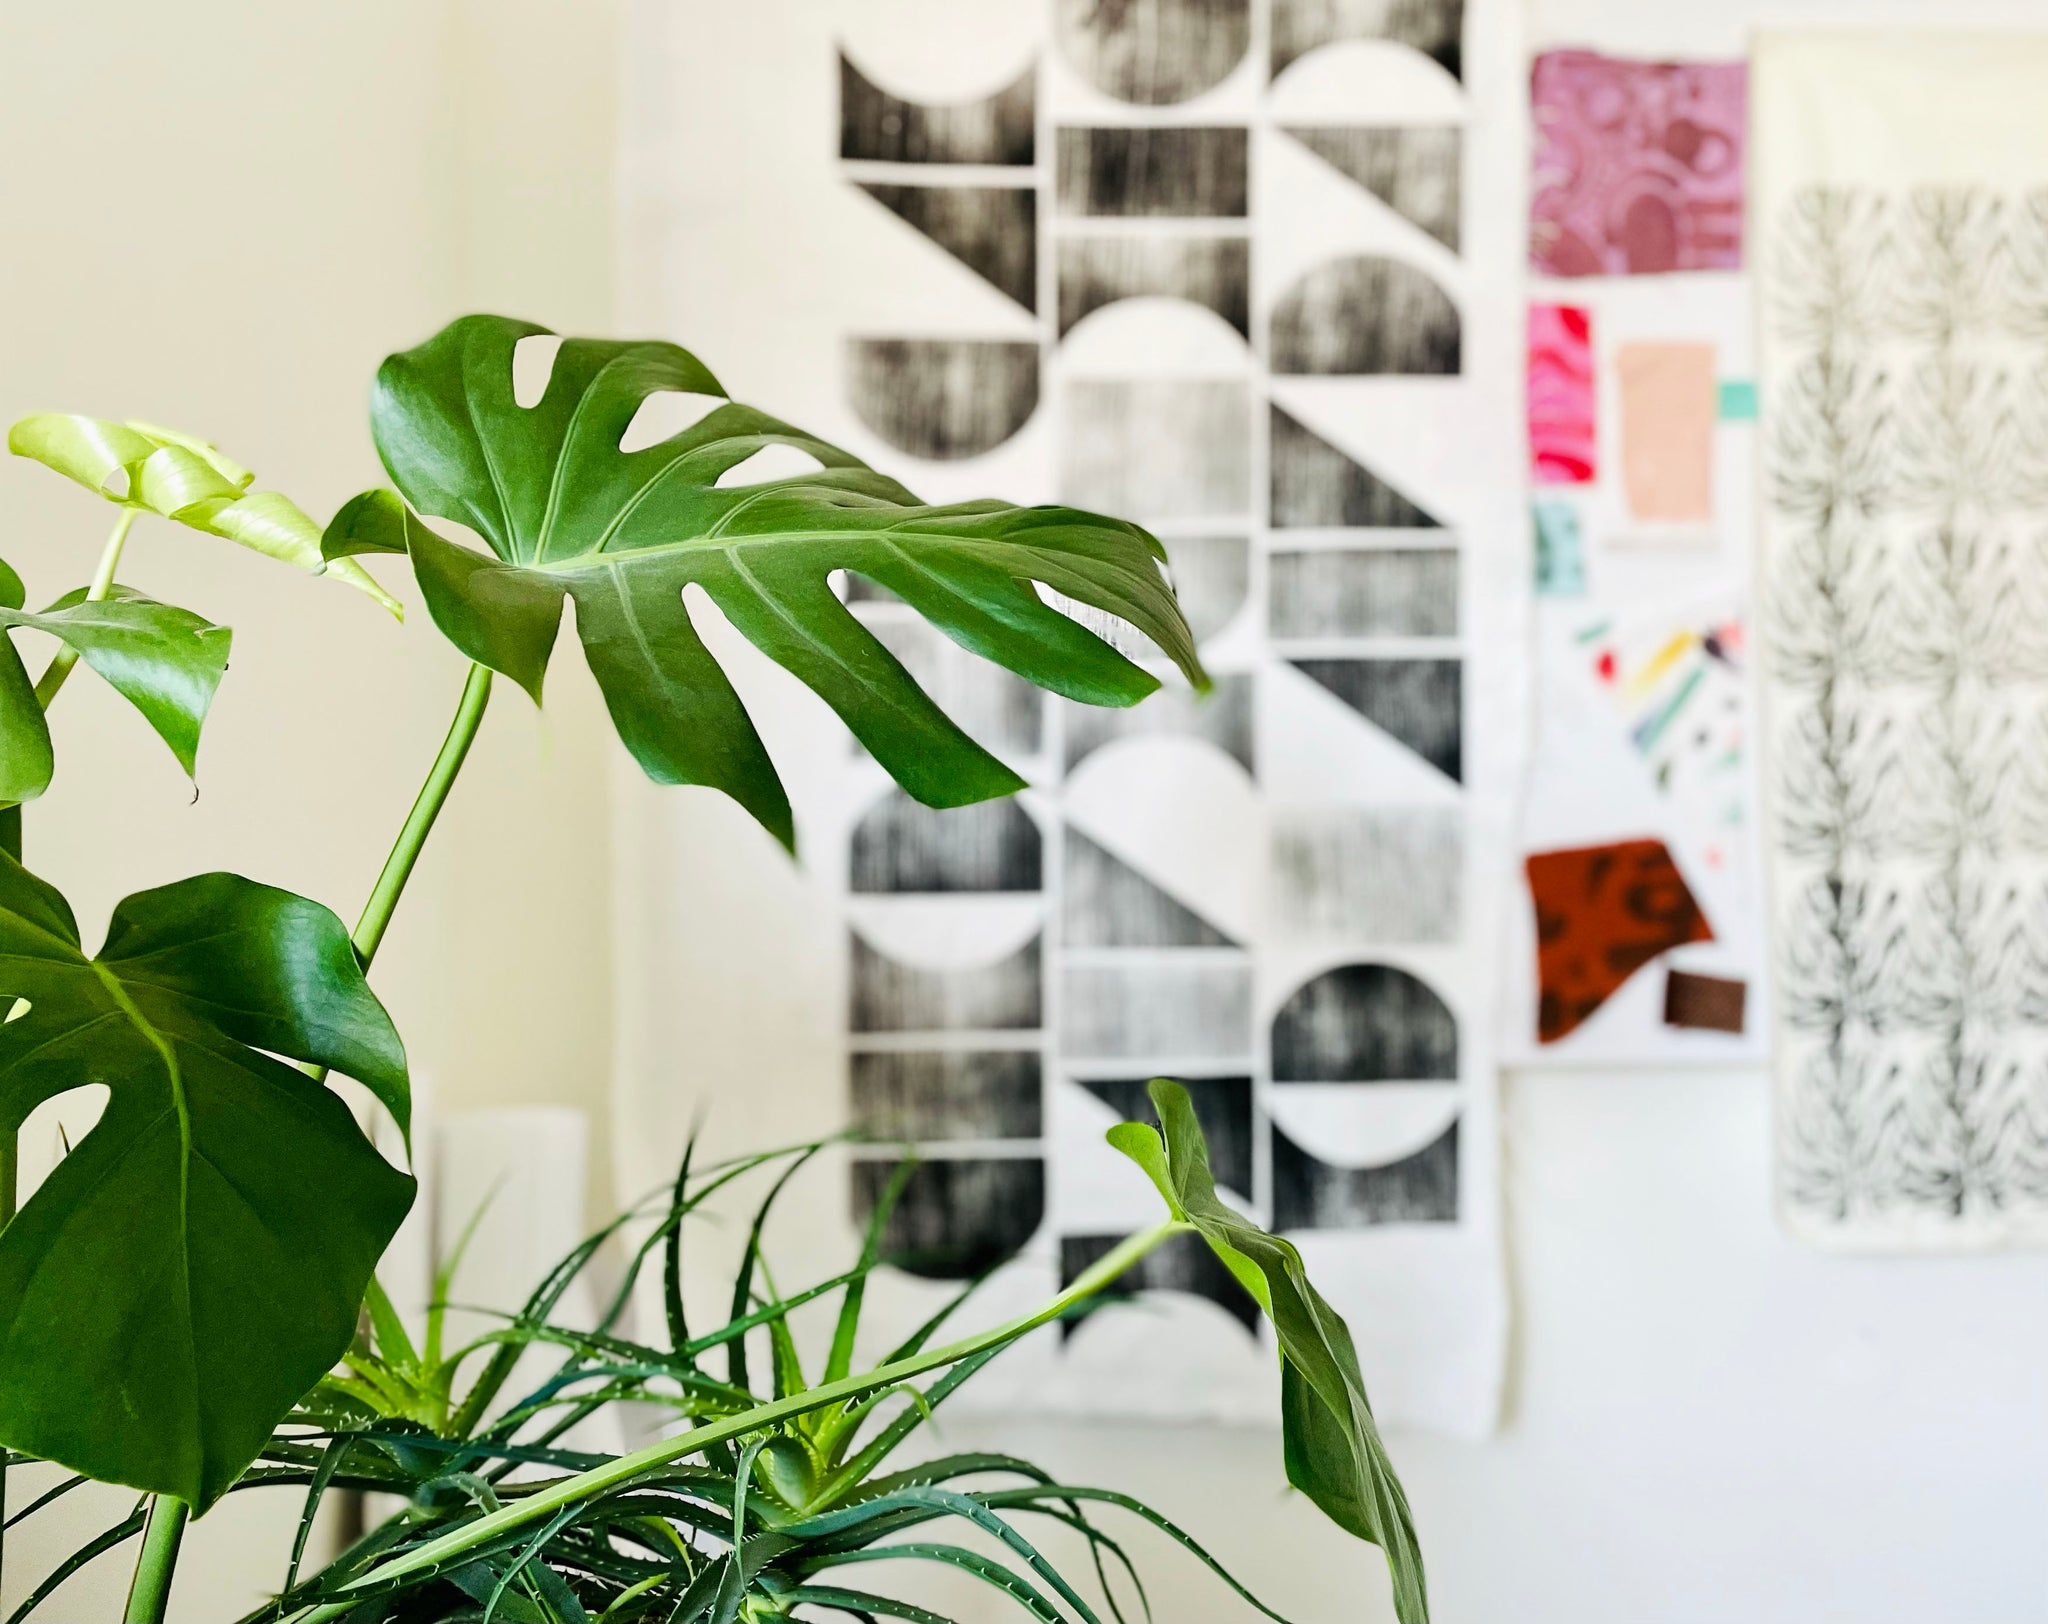 A studio with prints hanging on the wall, with a plant in the foreground.